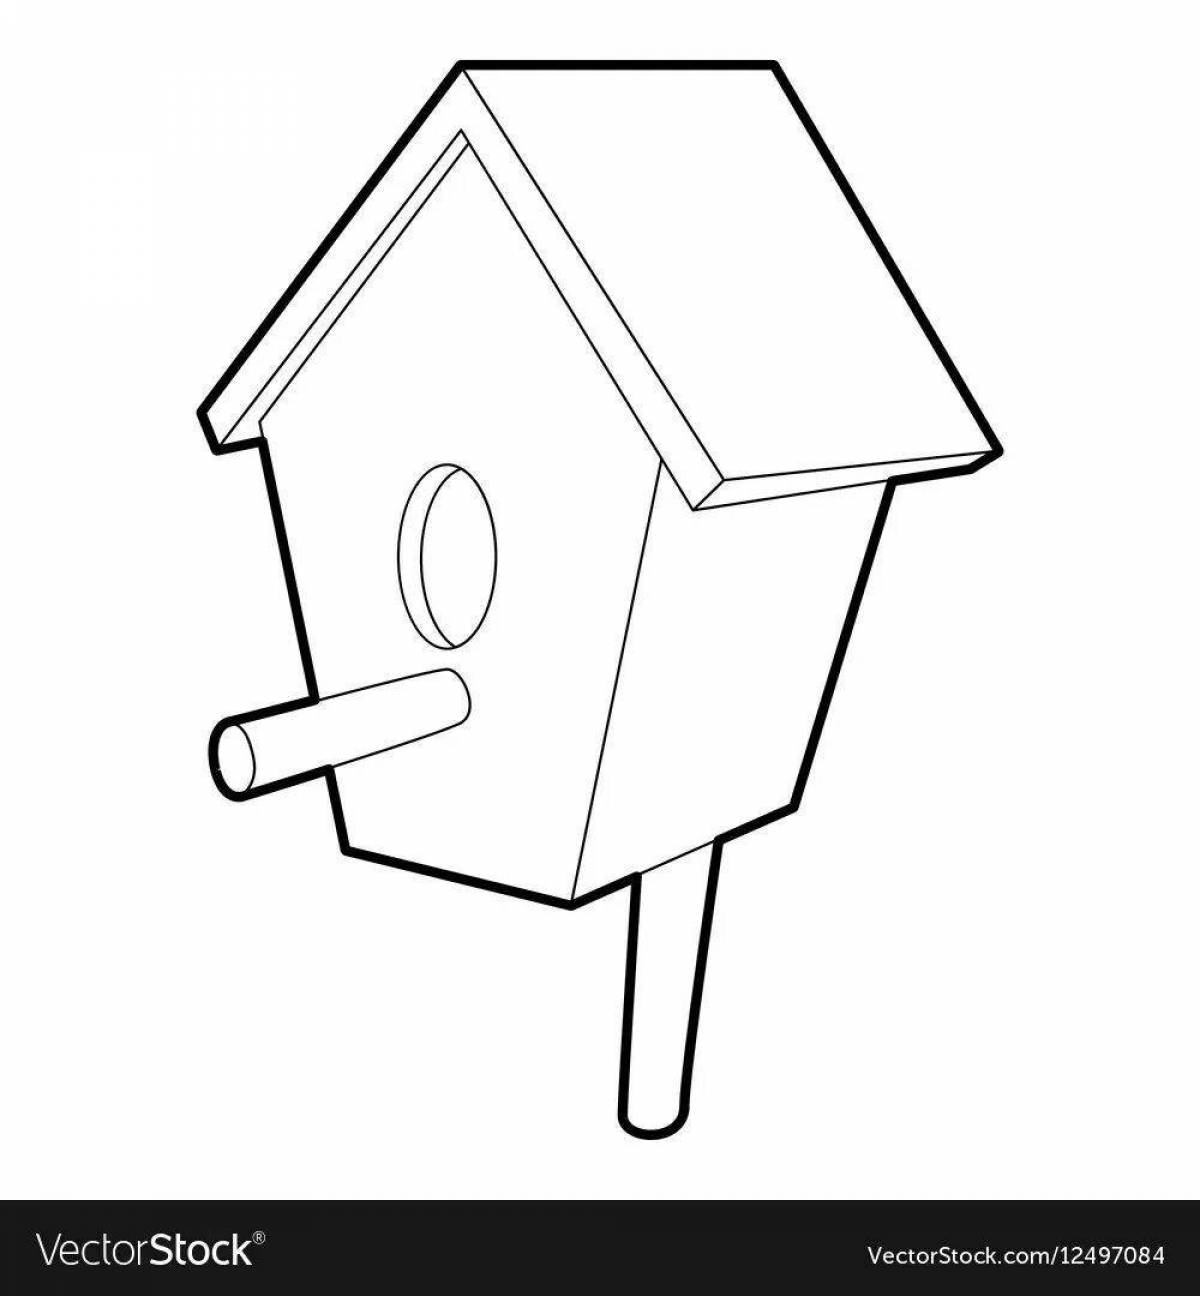 Exquisite birdhouse coloring book for 3-4 year olds